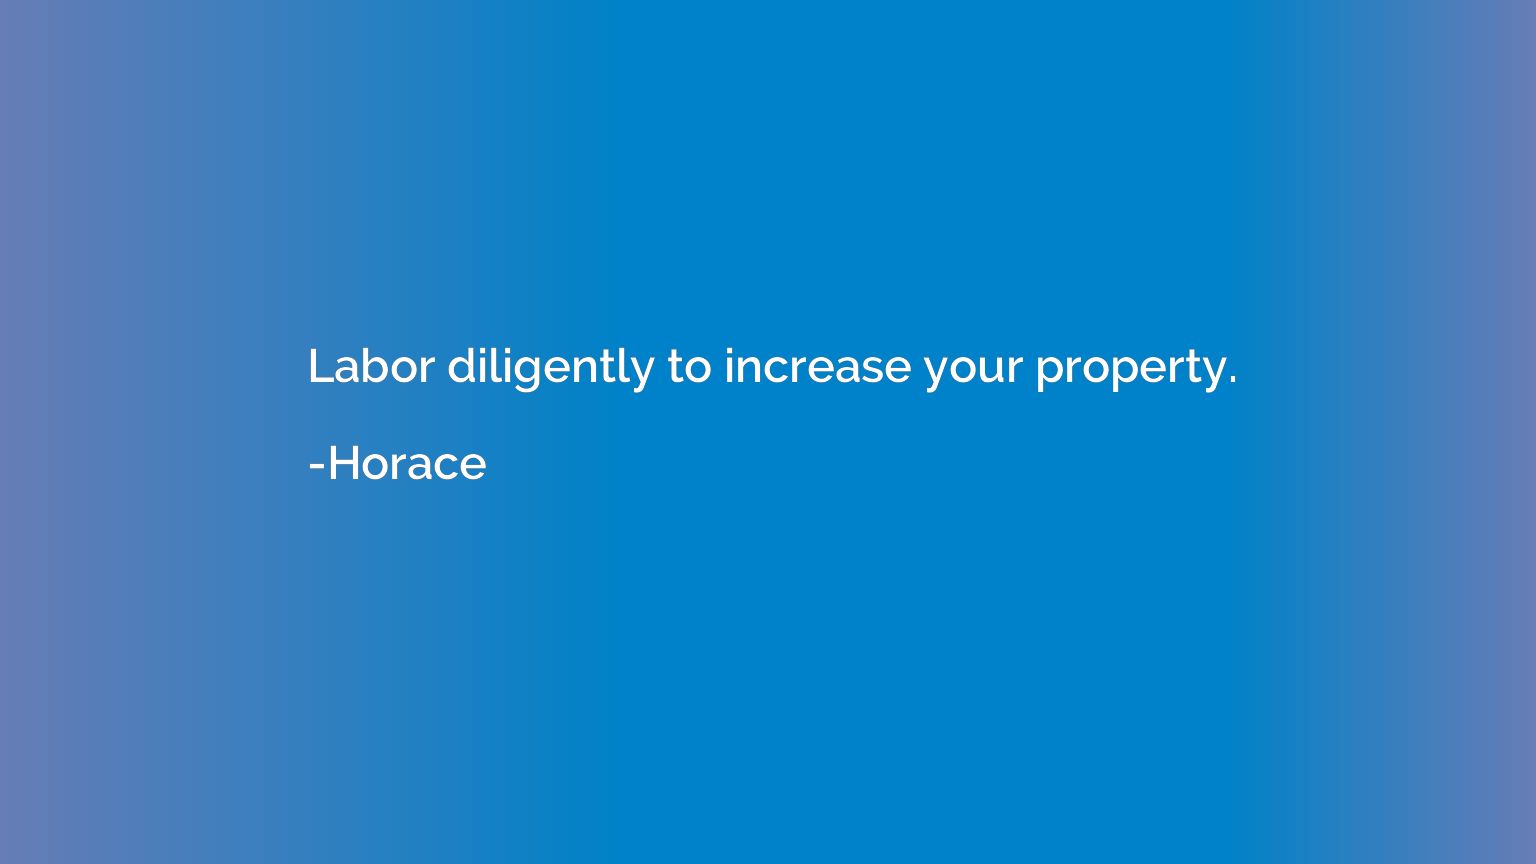 Labor diligently to increase your property.